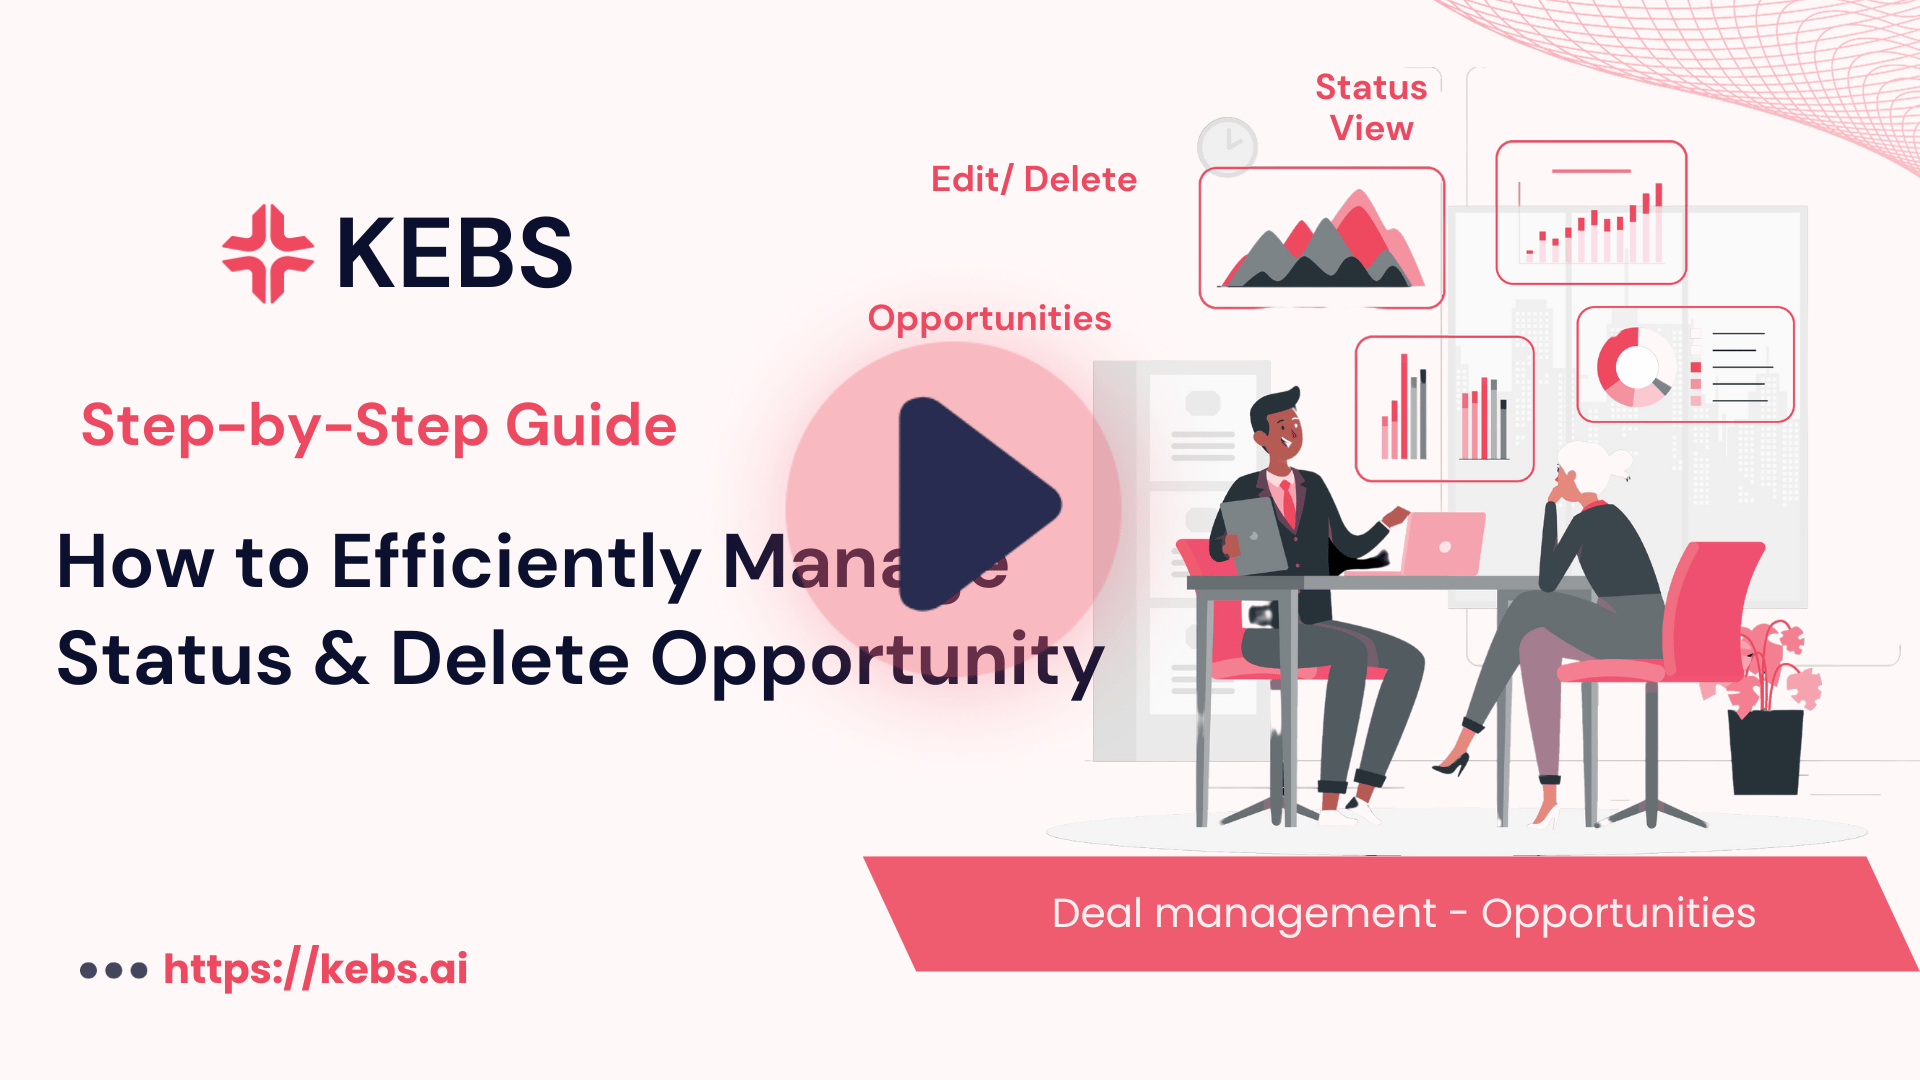 How to Efficiently Manage Status & Delete Opportunity